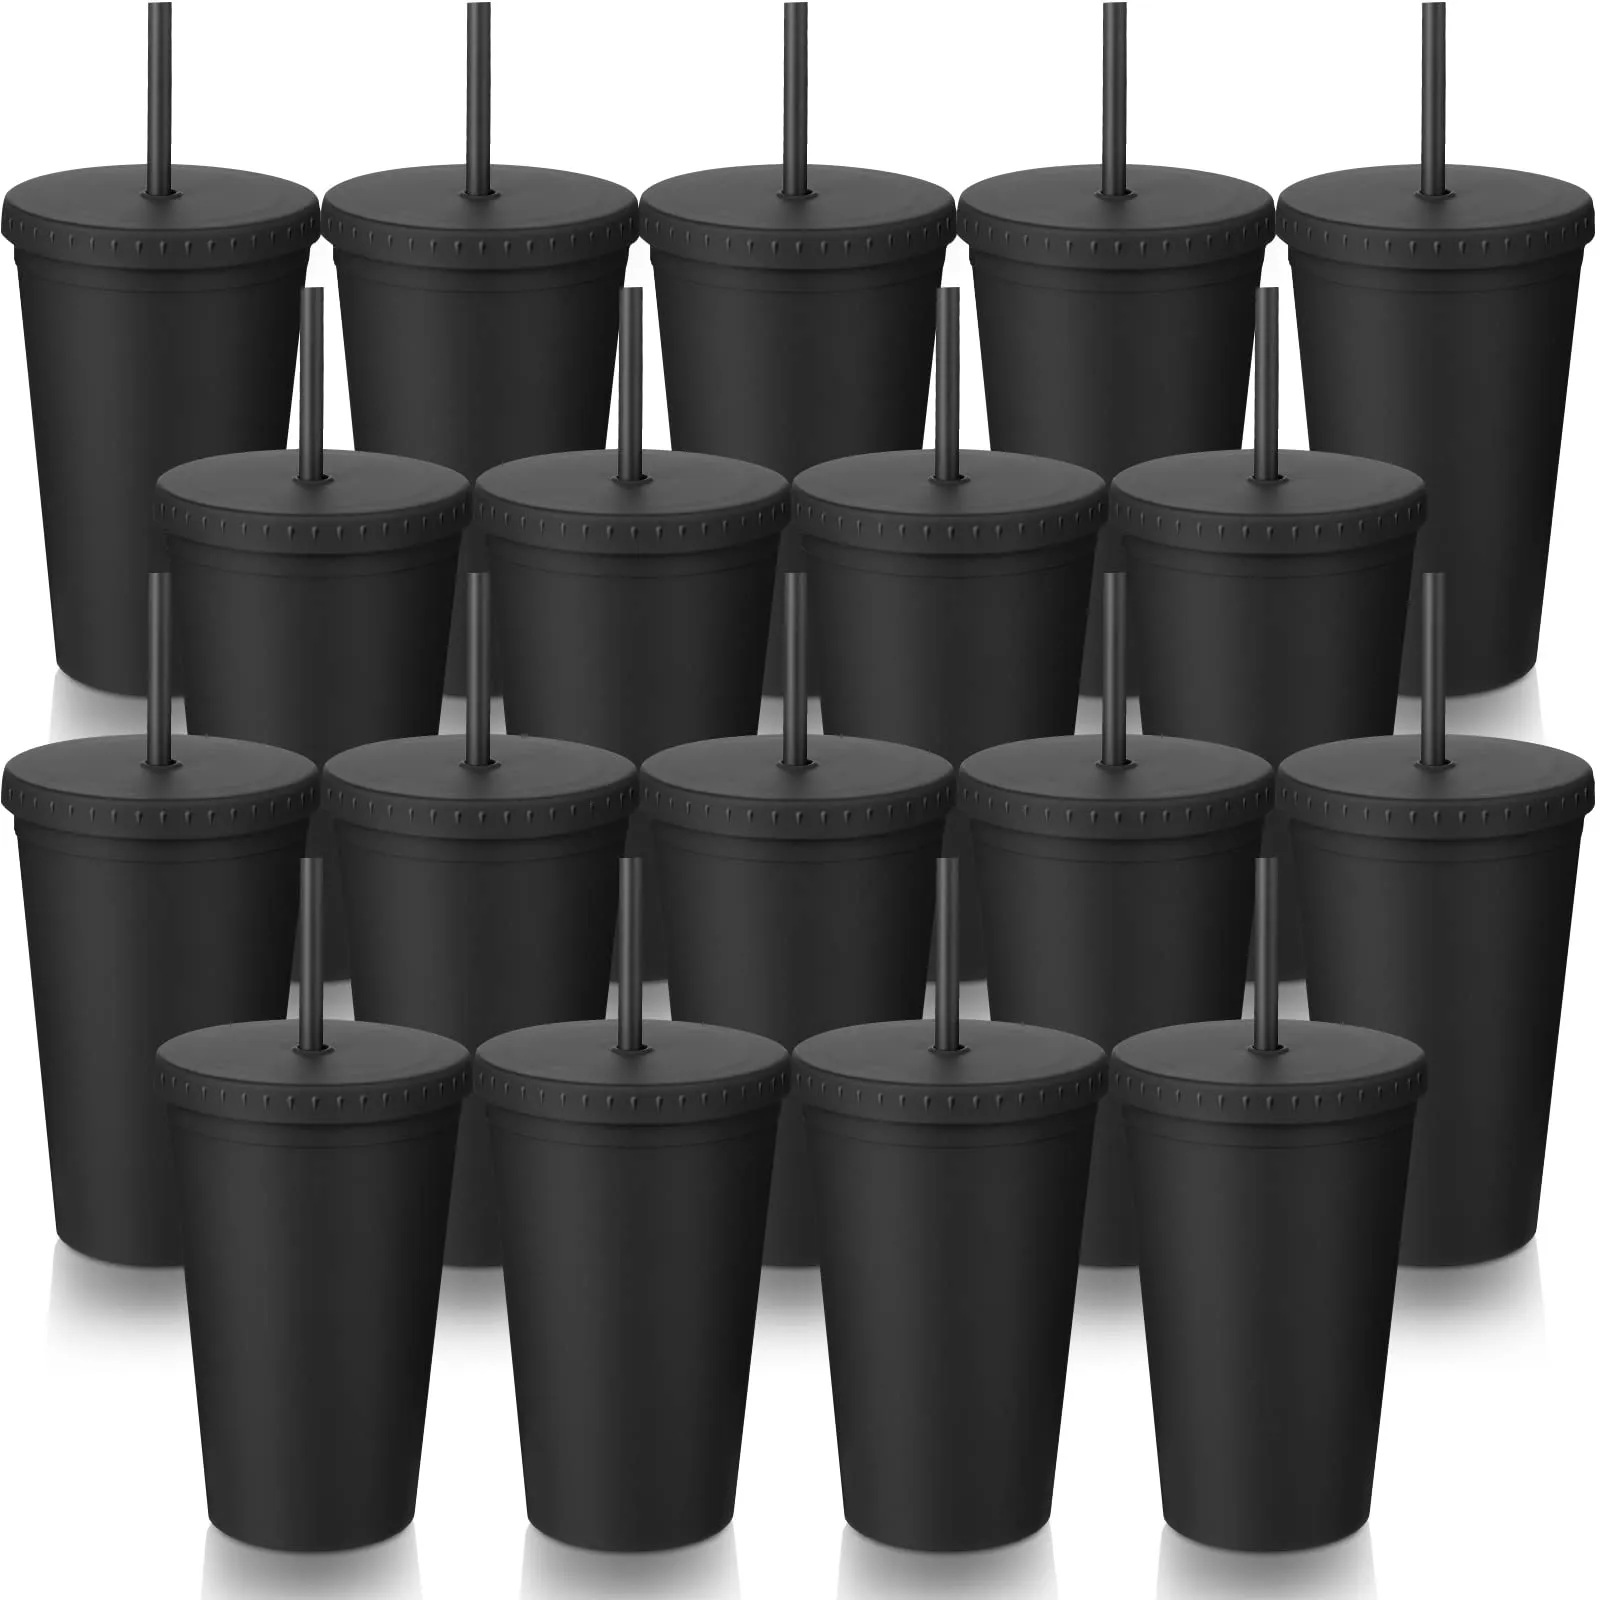 Mugs Tumblers With Sts And Lids Plastic St Cups 16oz Reusable For Adts Kids Water Coffee Milk Smoothie Black